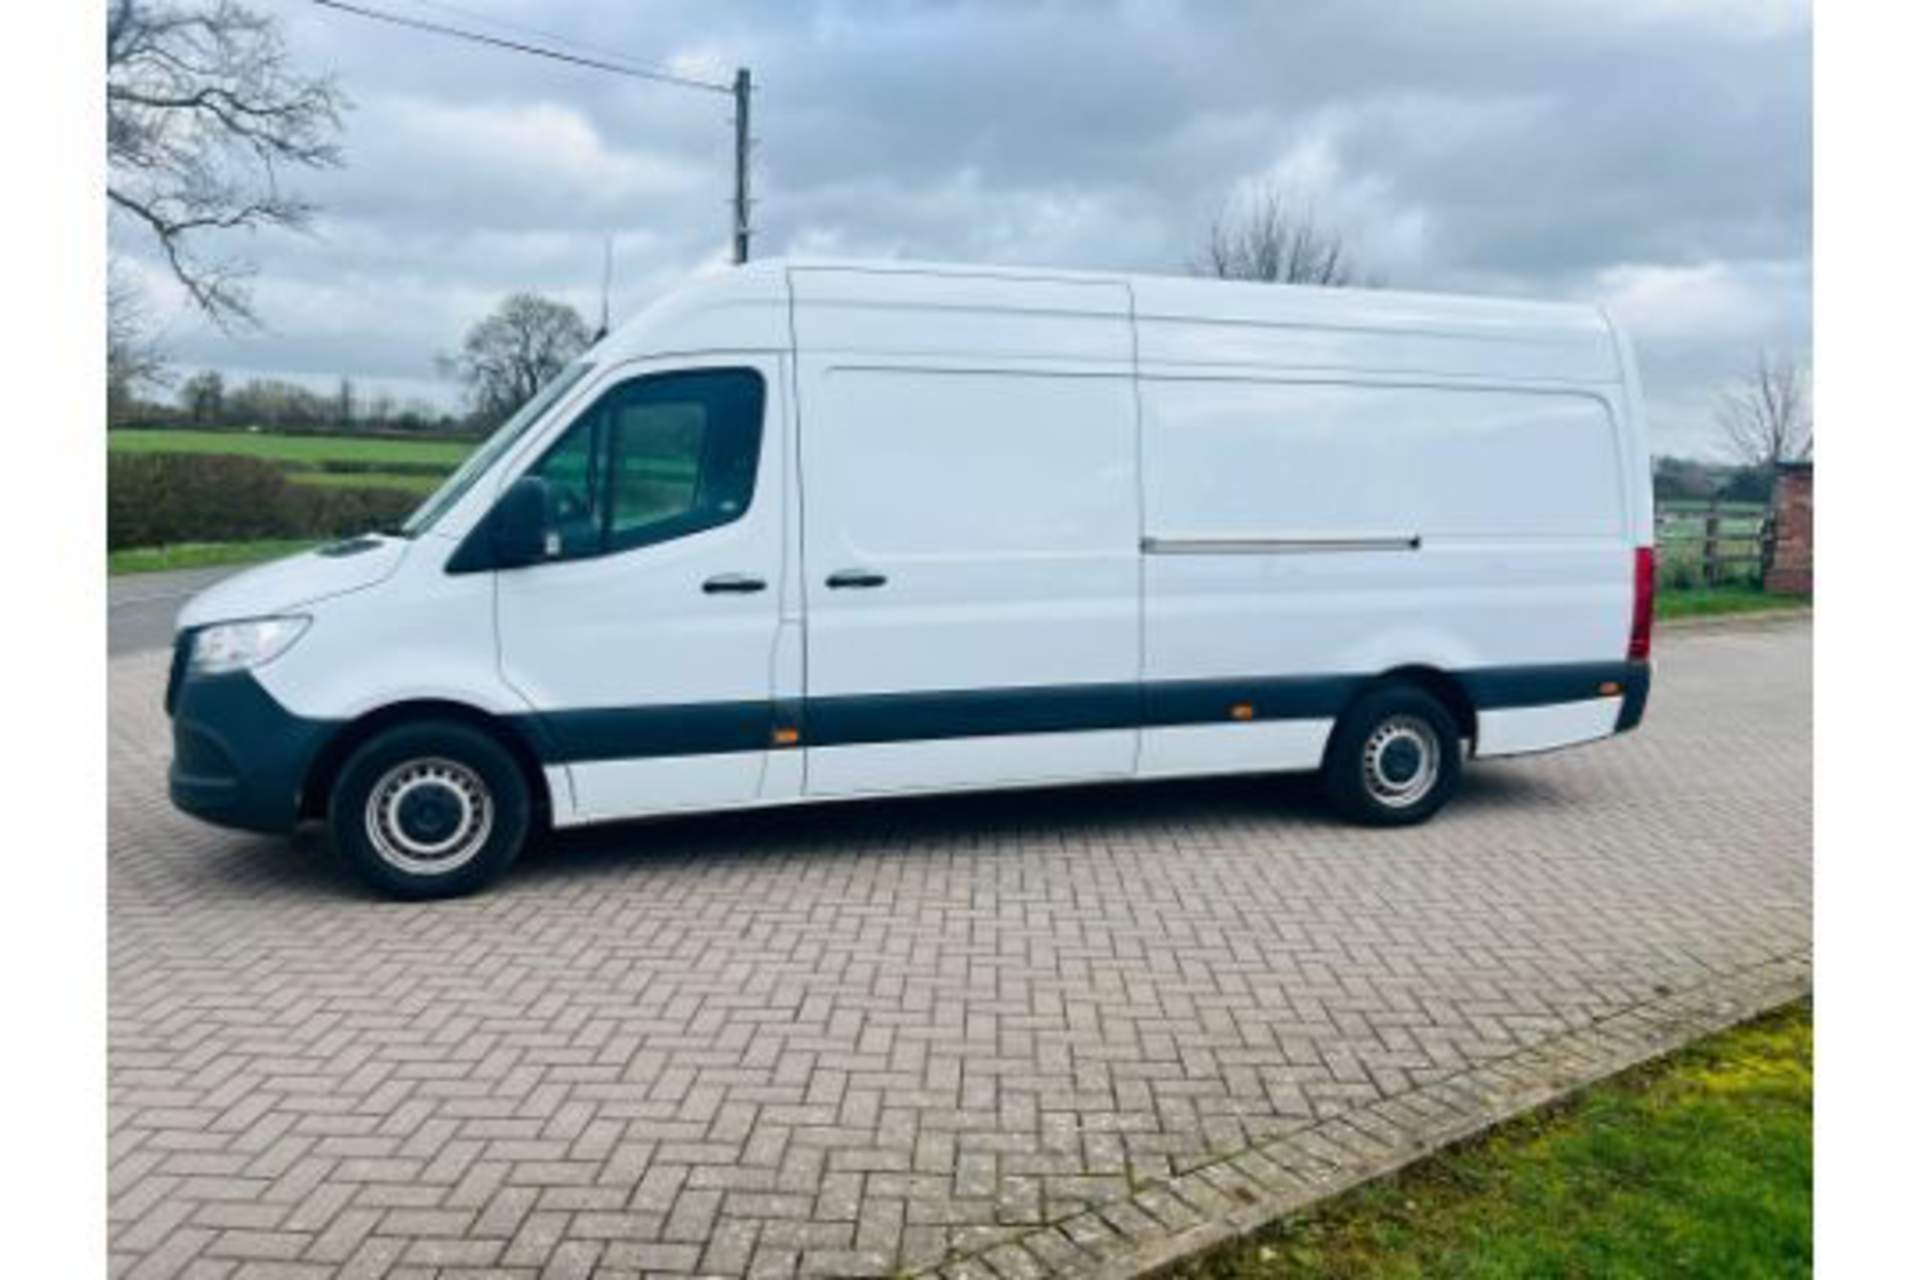 (Reserve Met) Sprinter 315Cdi Lwb High Roof 70 Reg - 1 Owner - Euro 6 - Only 60K Miles From New FSH